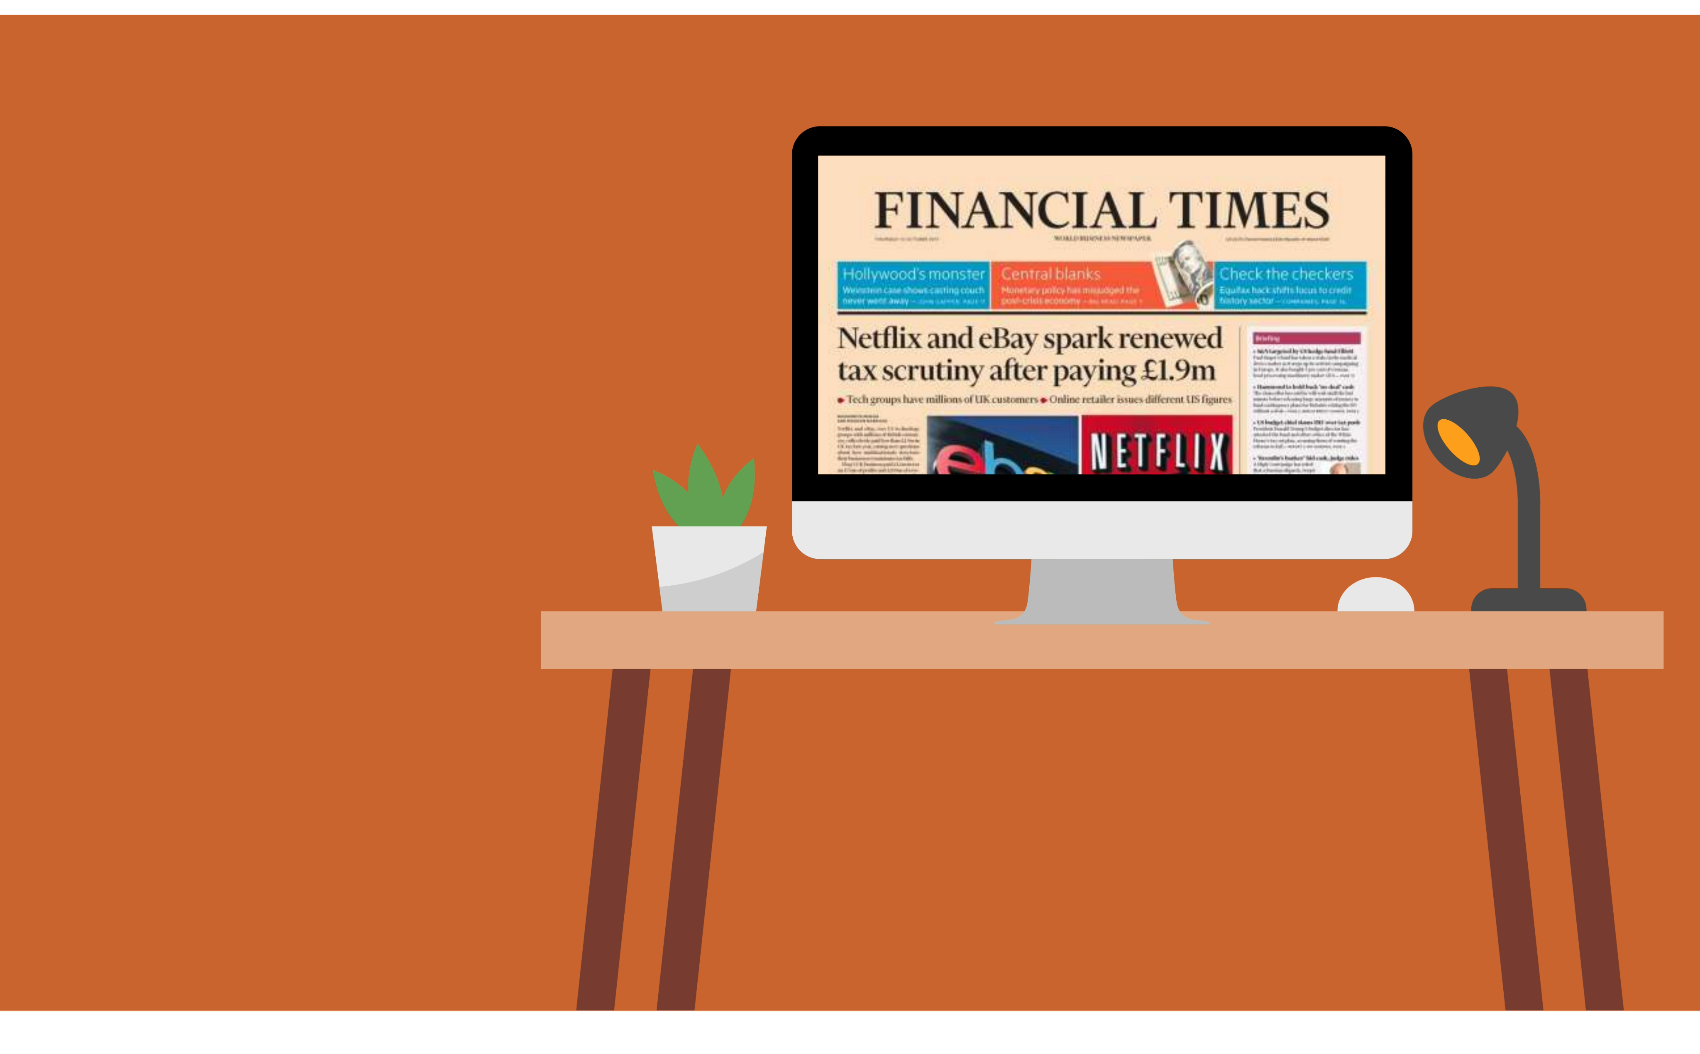 Cartoon image of a desk. The center of desk has a desktop computer monitor showing Financial Times online, to the right you see a plant and to the left, a desk lamp